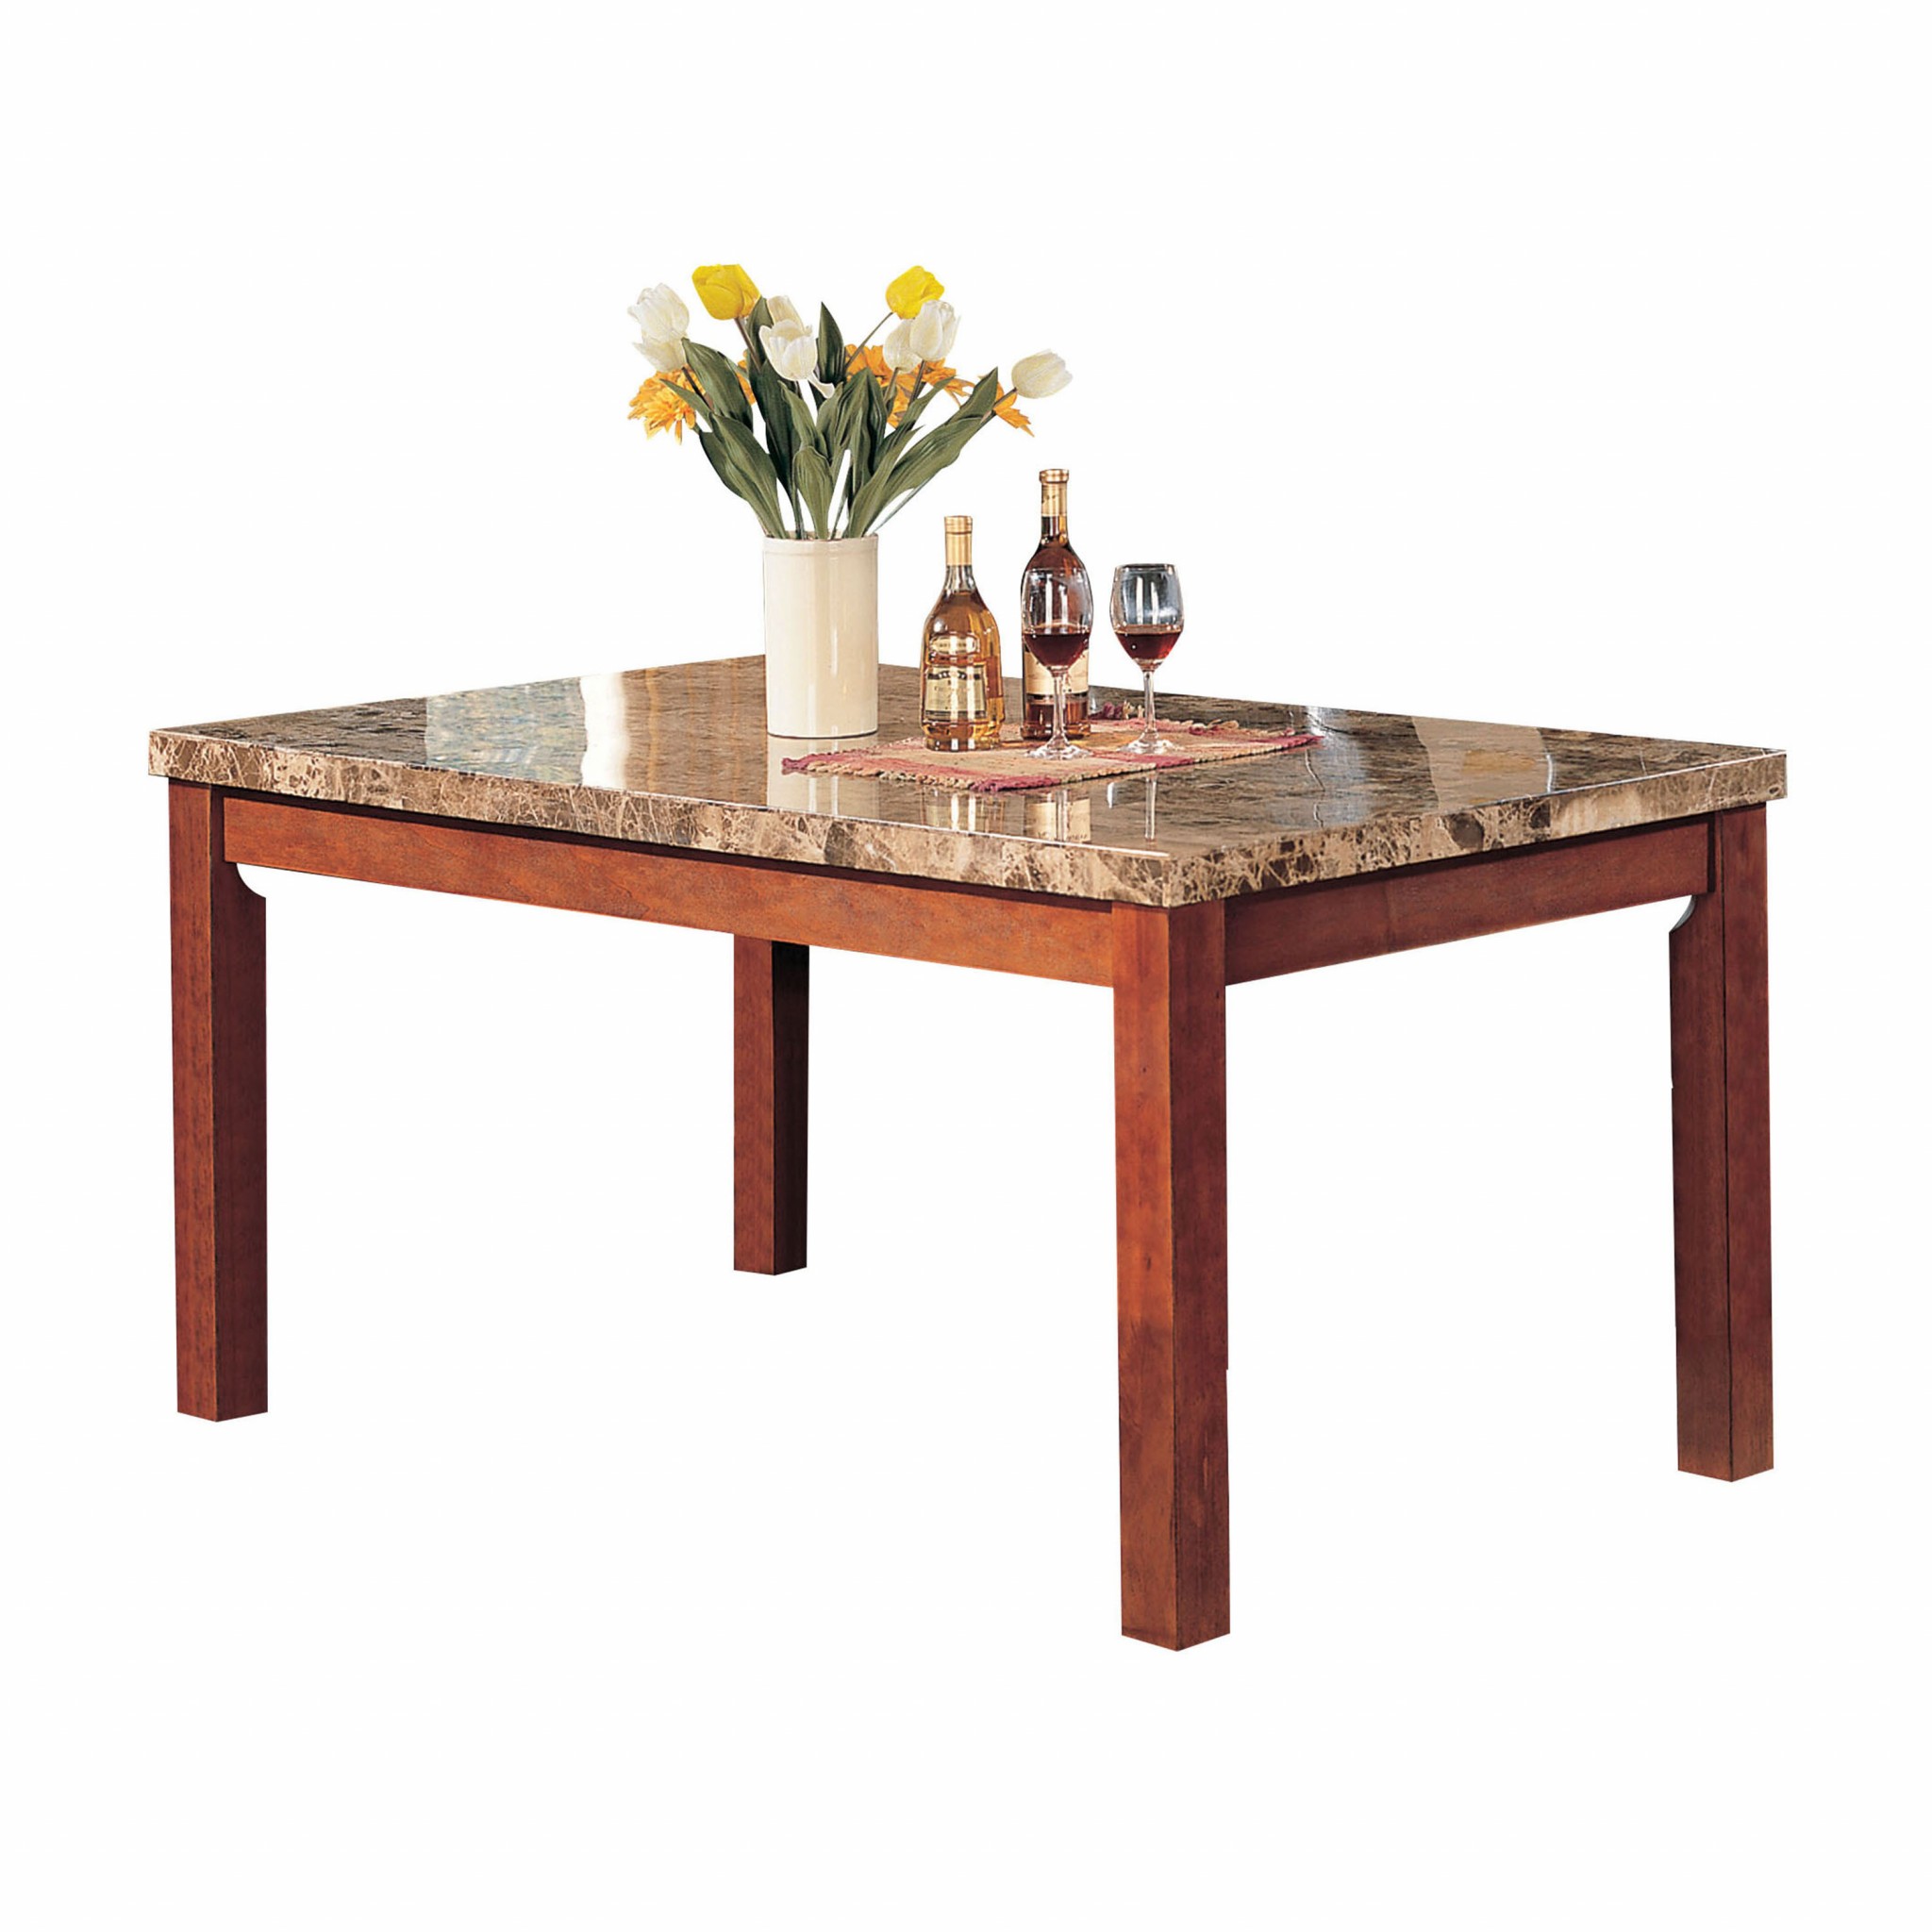 38" X 64" X 31" Brown Marble & Cherry Wood Dining Table